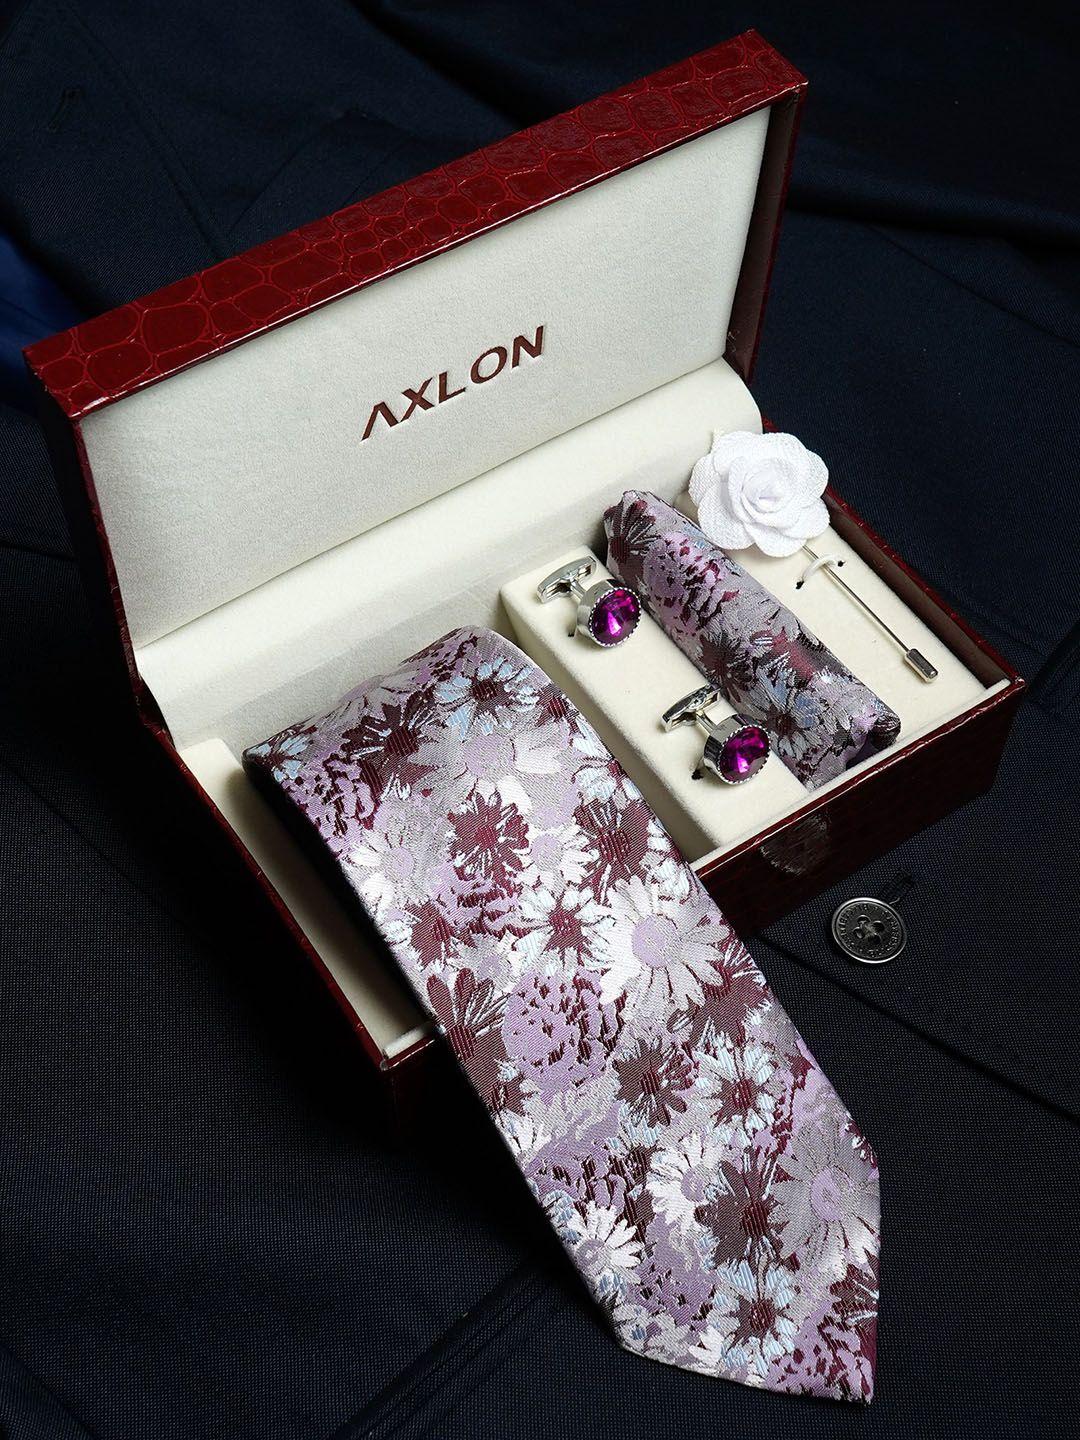 axlon set of 4 printed necktie pocket square with cufflink & flower pin accessory gift set